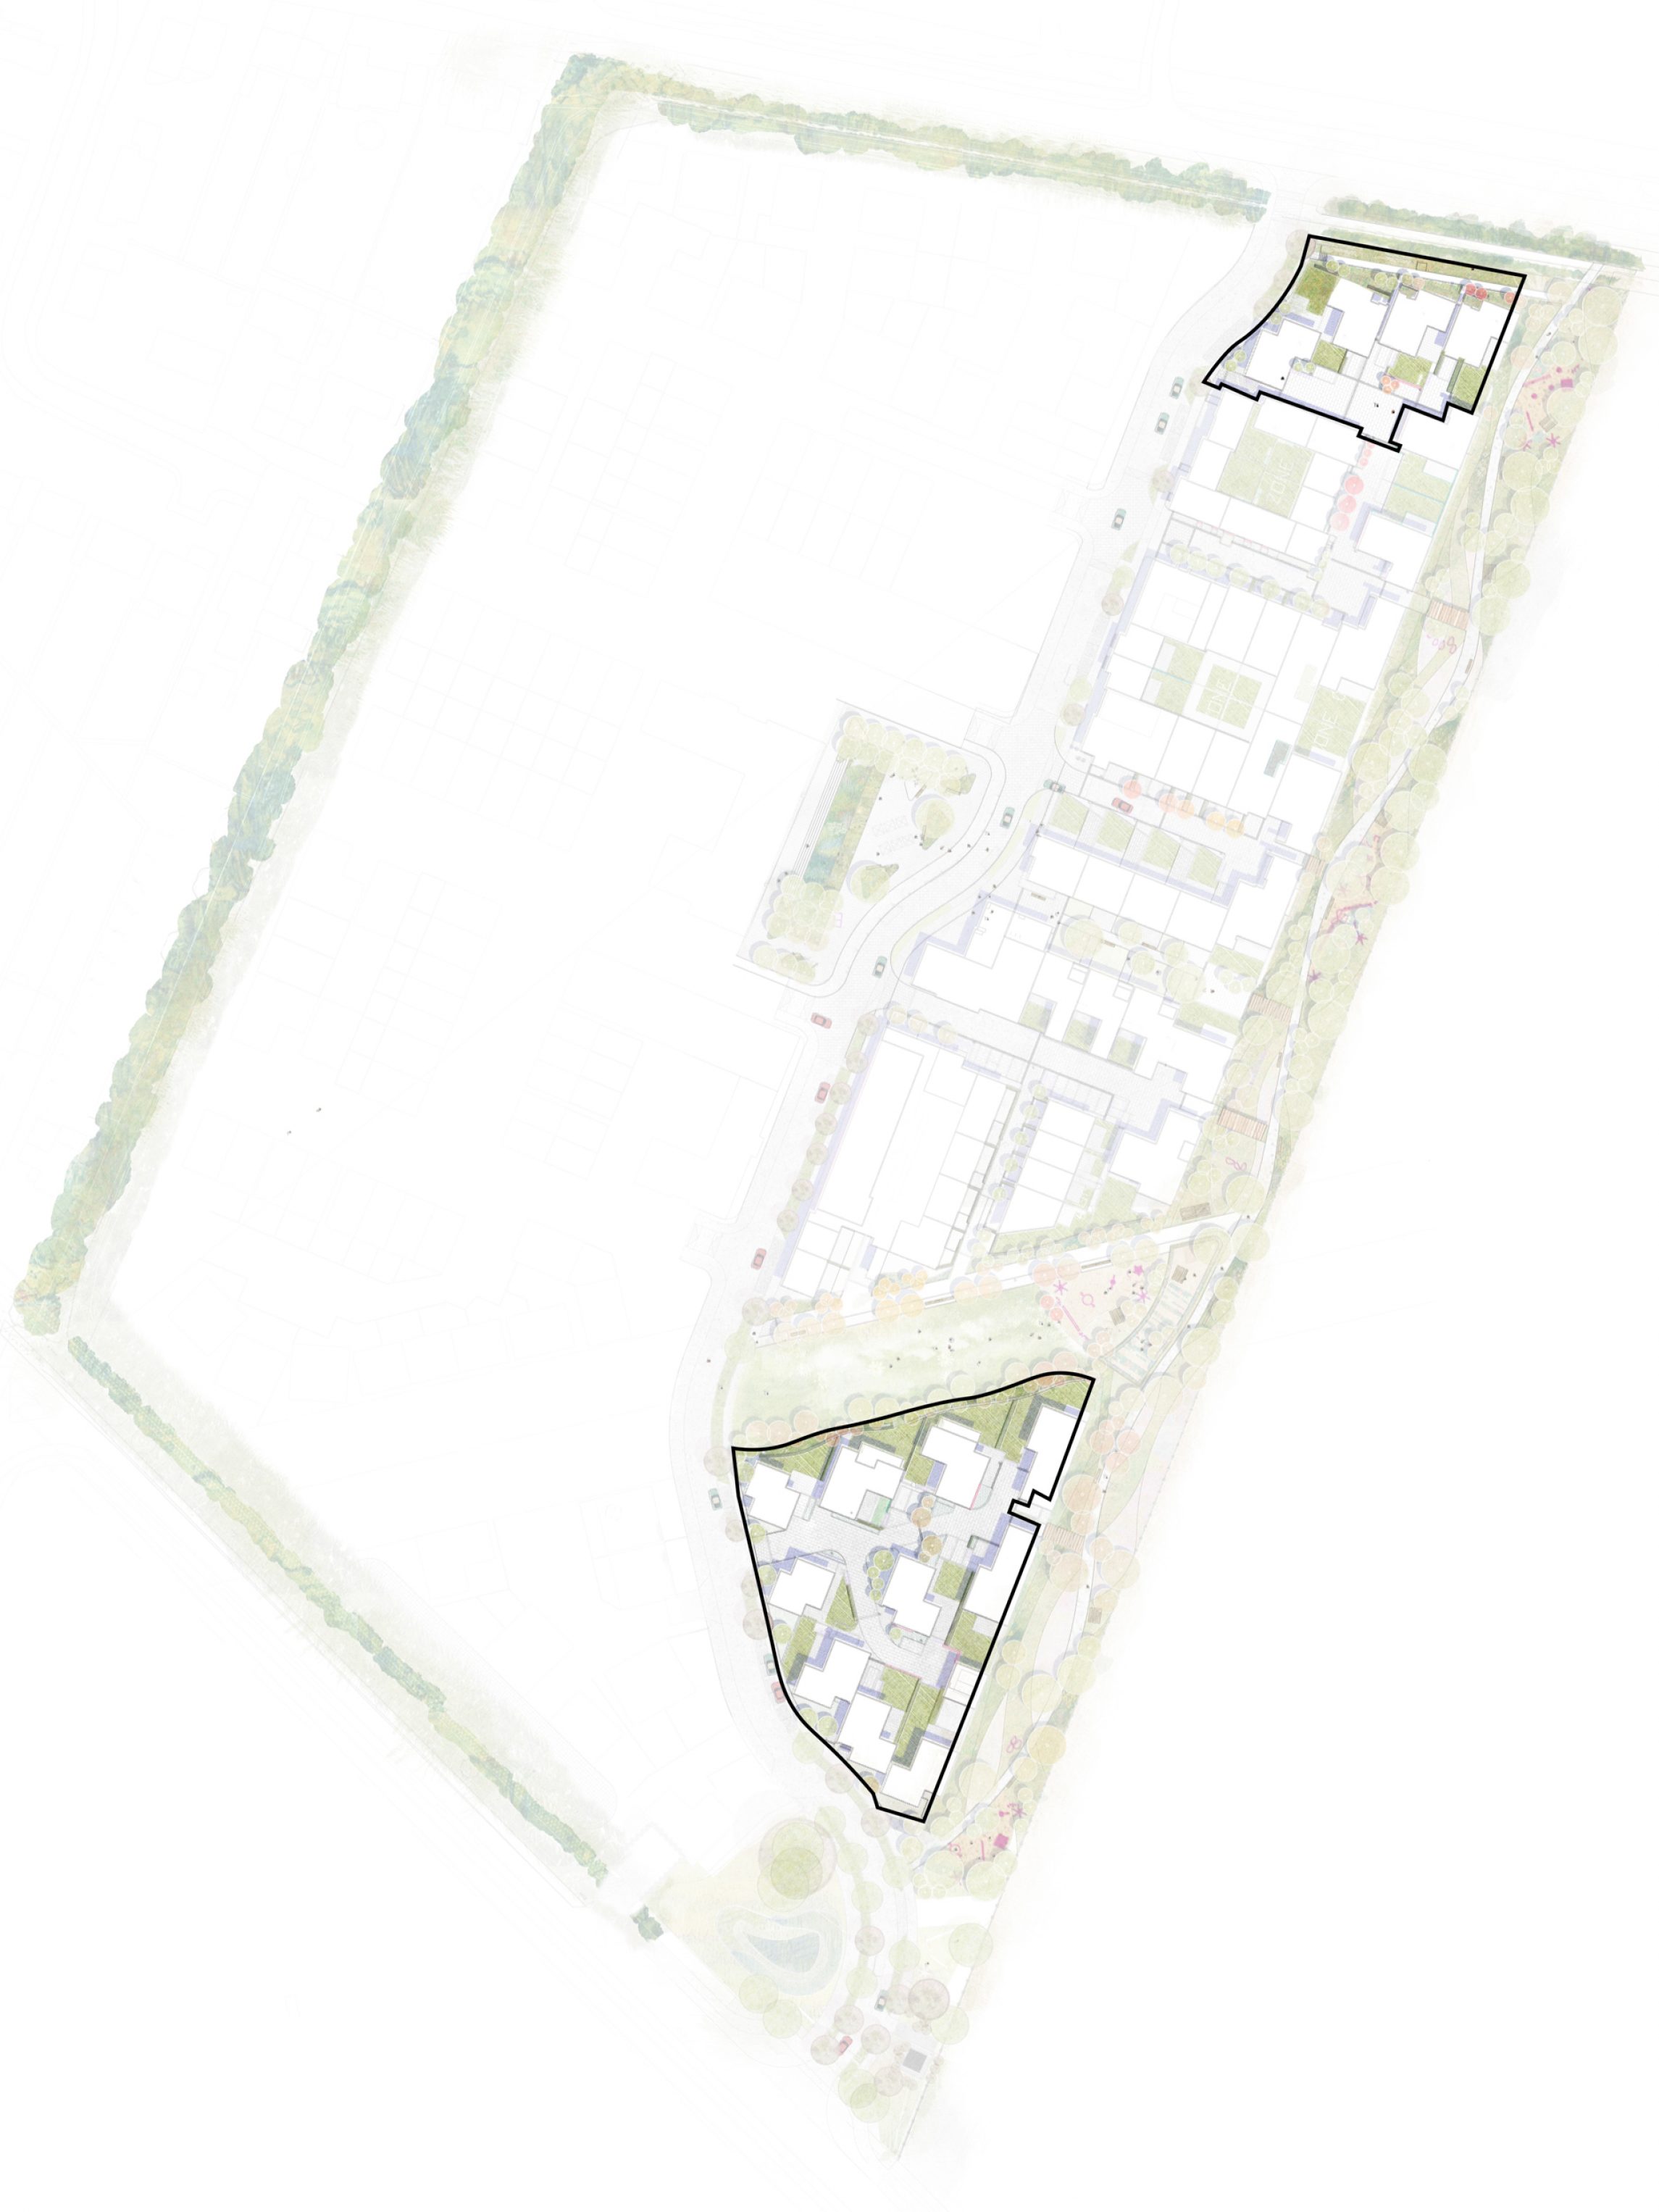 Landscape plan showing location of the site in environs